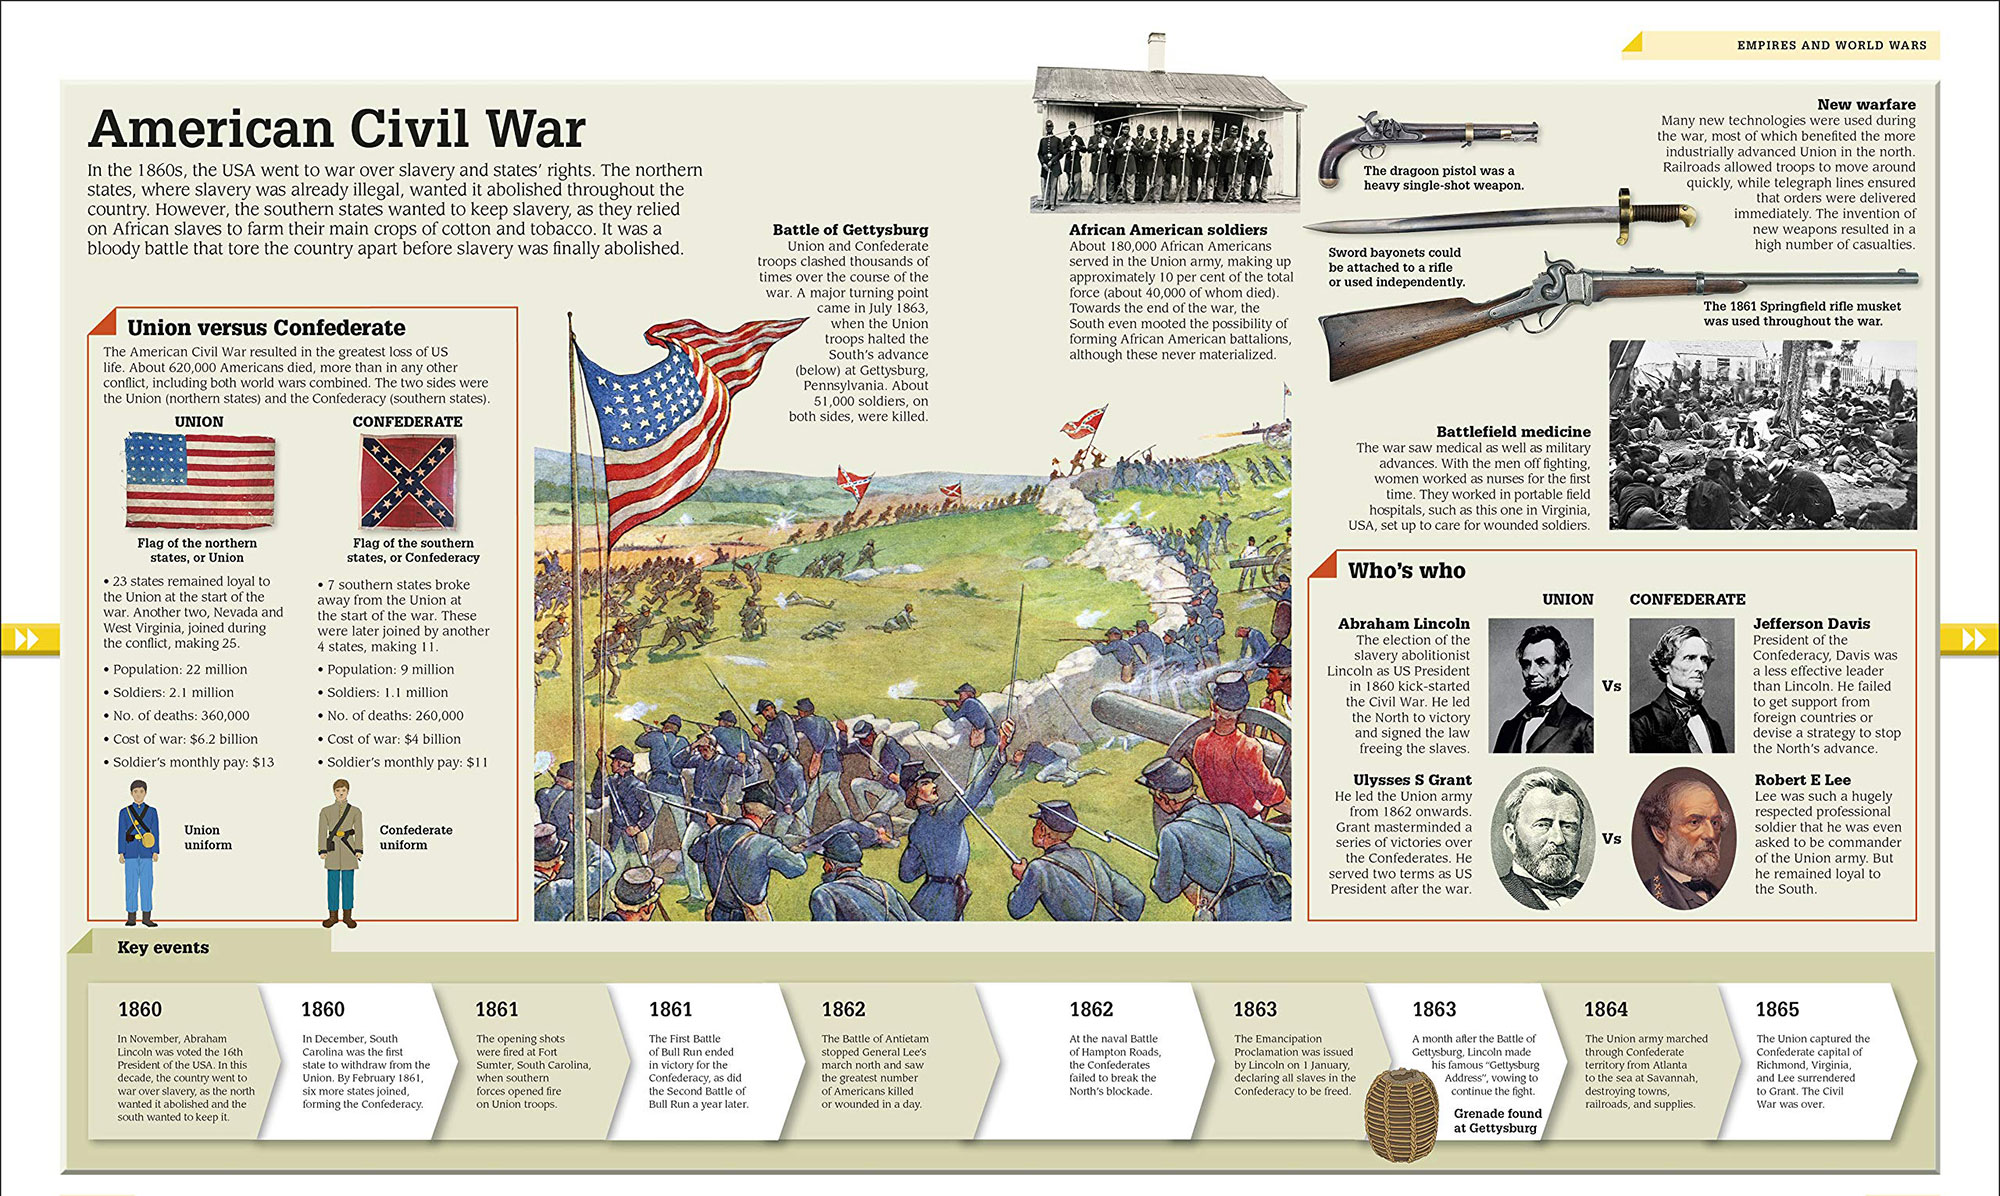 Timeline and captioned graphics about the Civil War